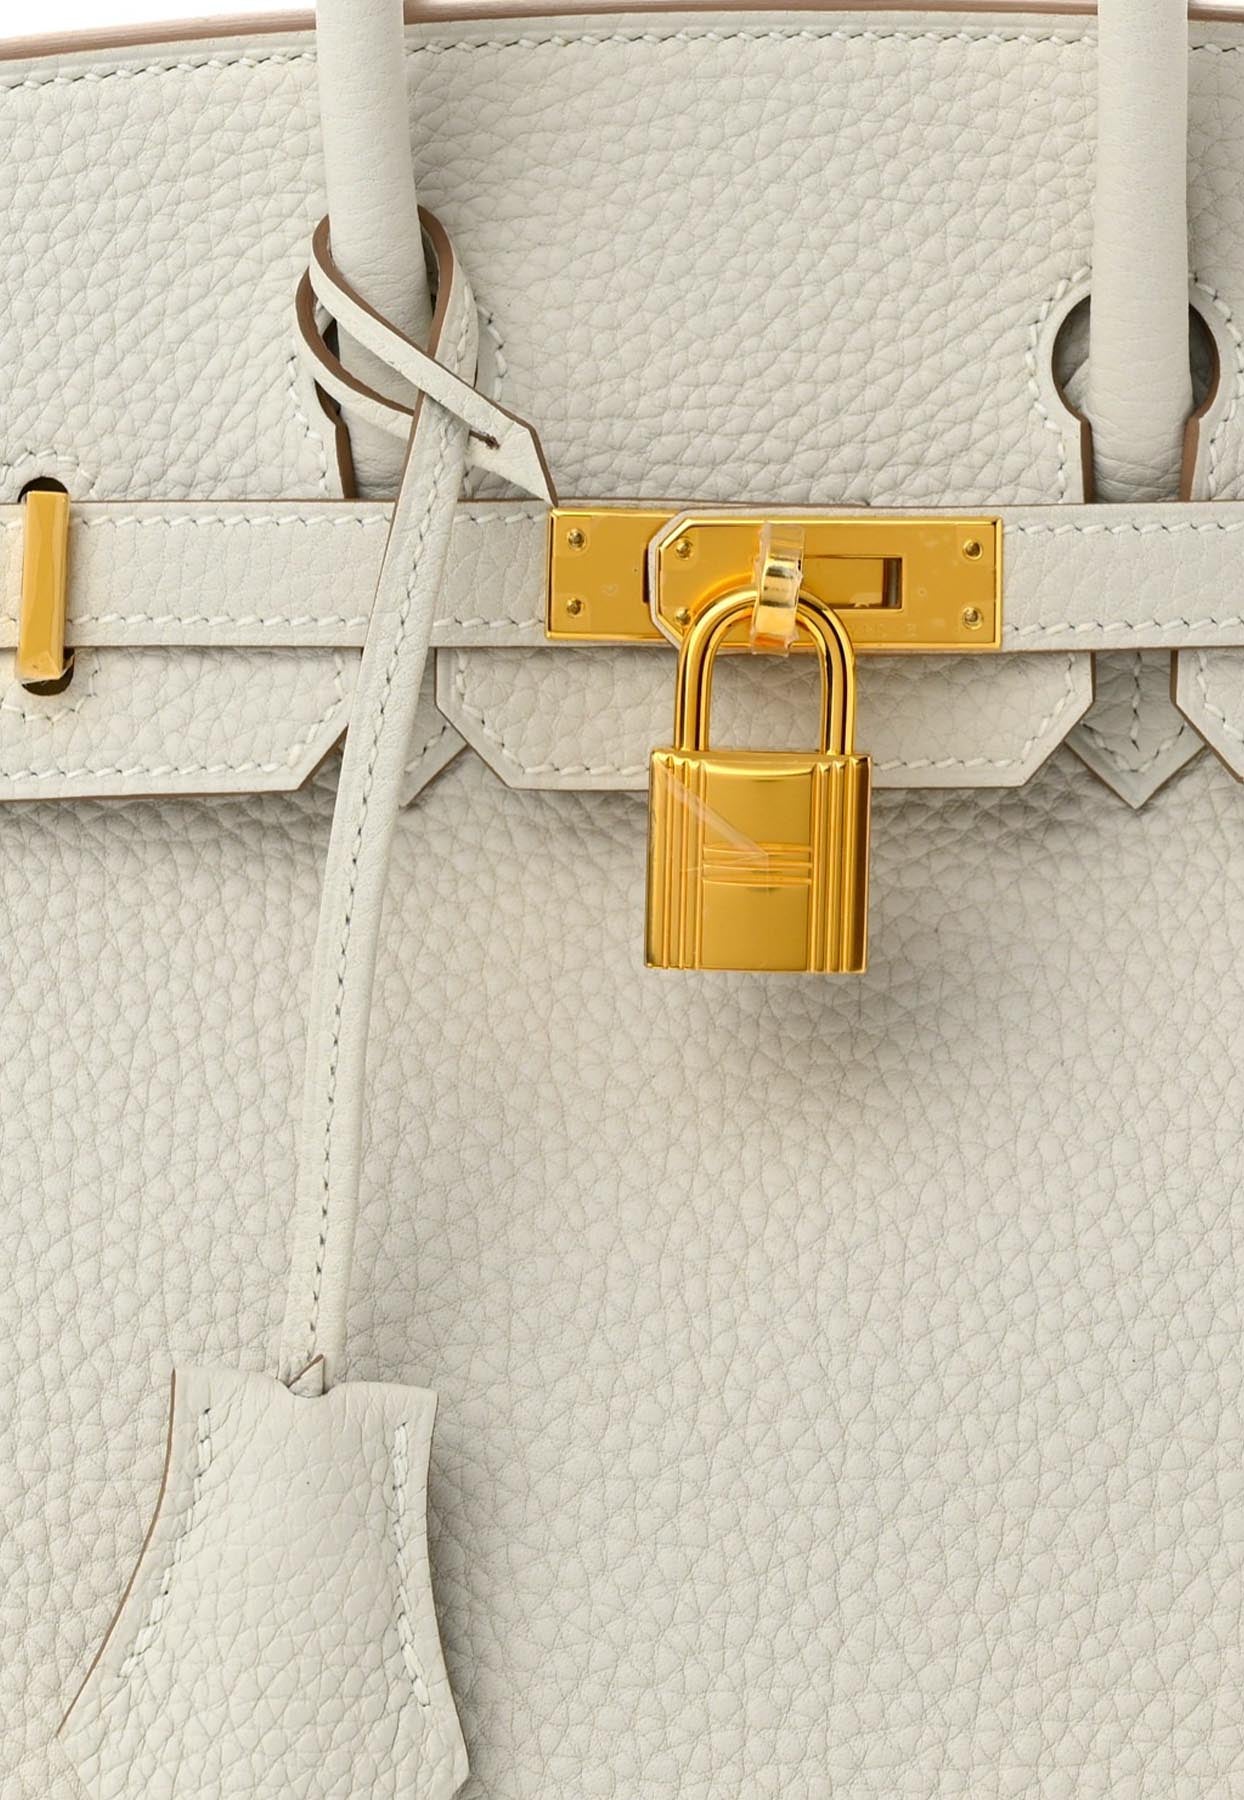 HERMÈS Birkin 25 handbag in Gris Meyer Togo leather with Gold hardware  [Consigned]-Ginza Xiaoma – Authentic Hermès Boutique